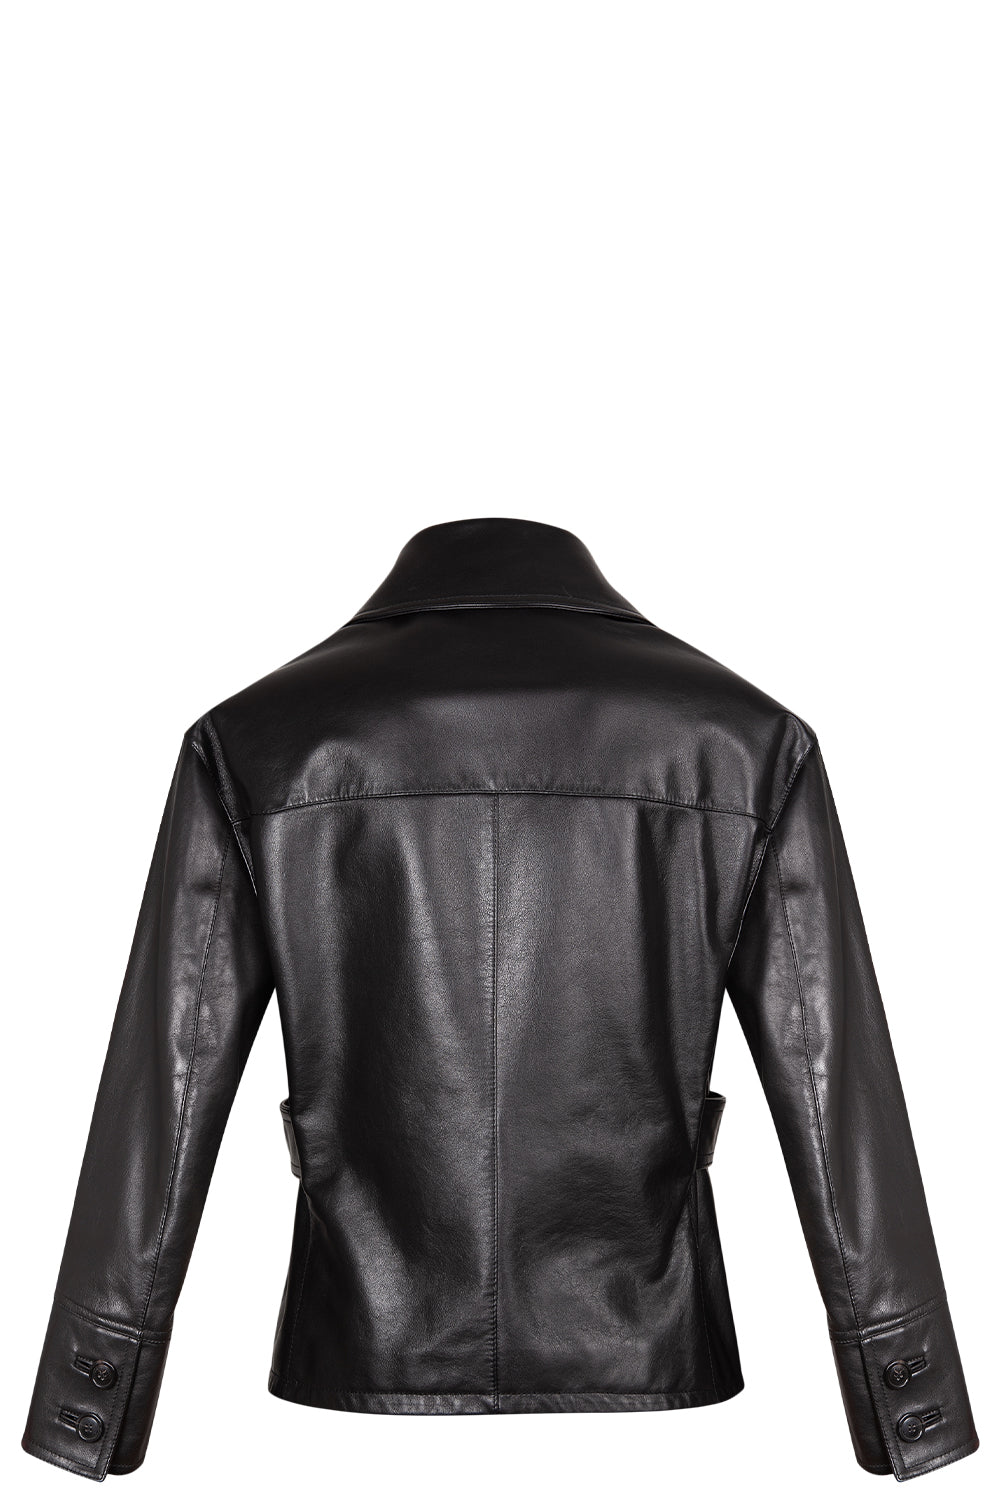 CHRISTIAN DIOR Leather Jacket